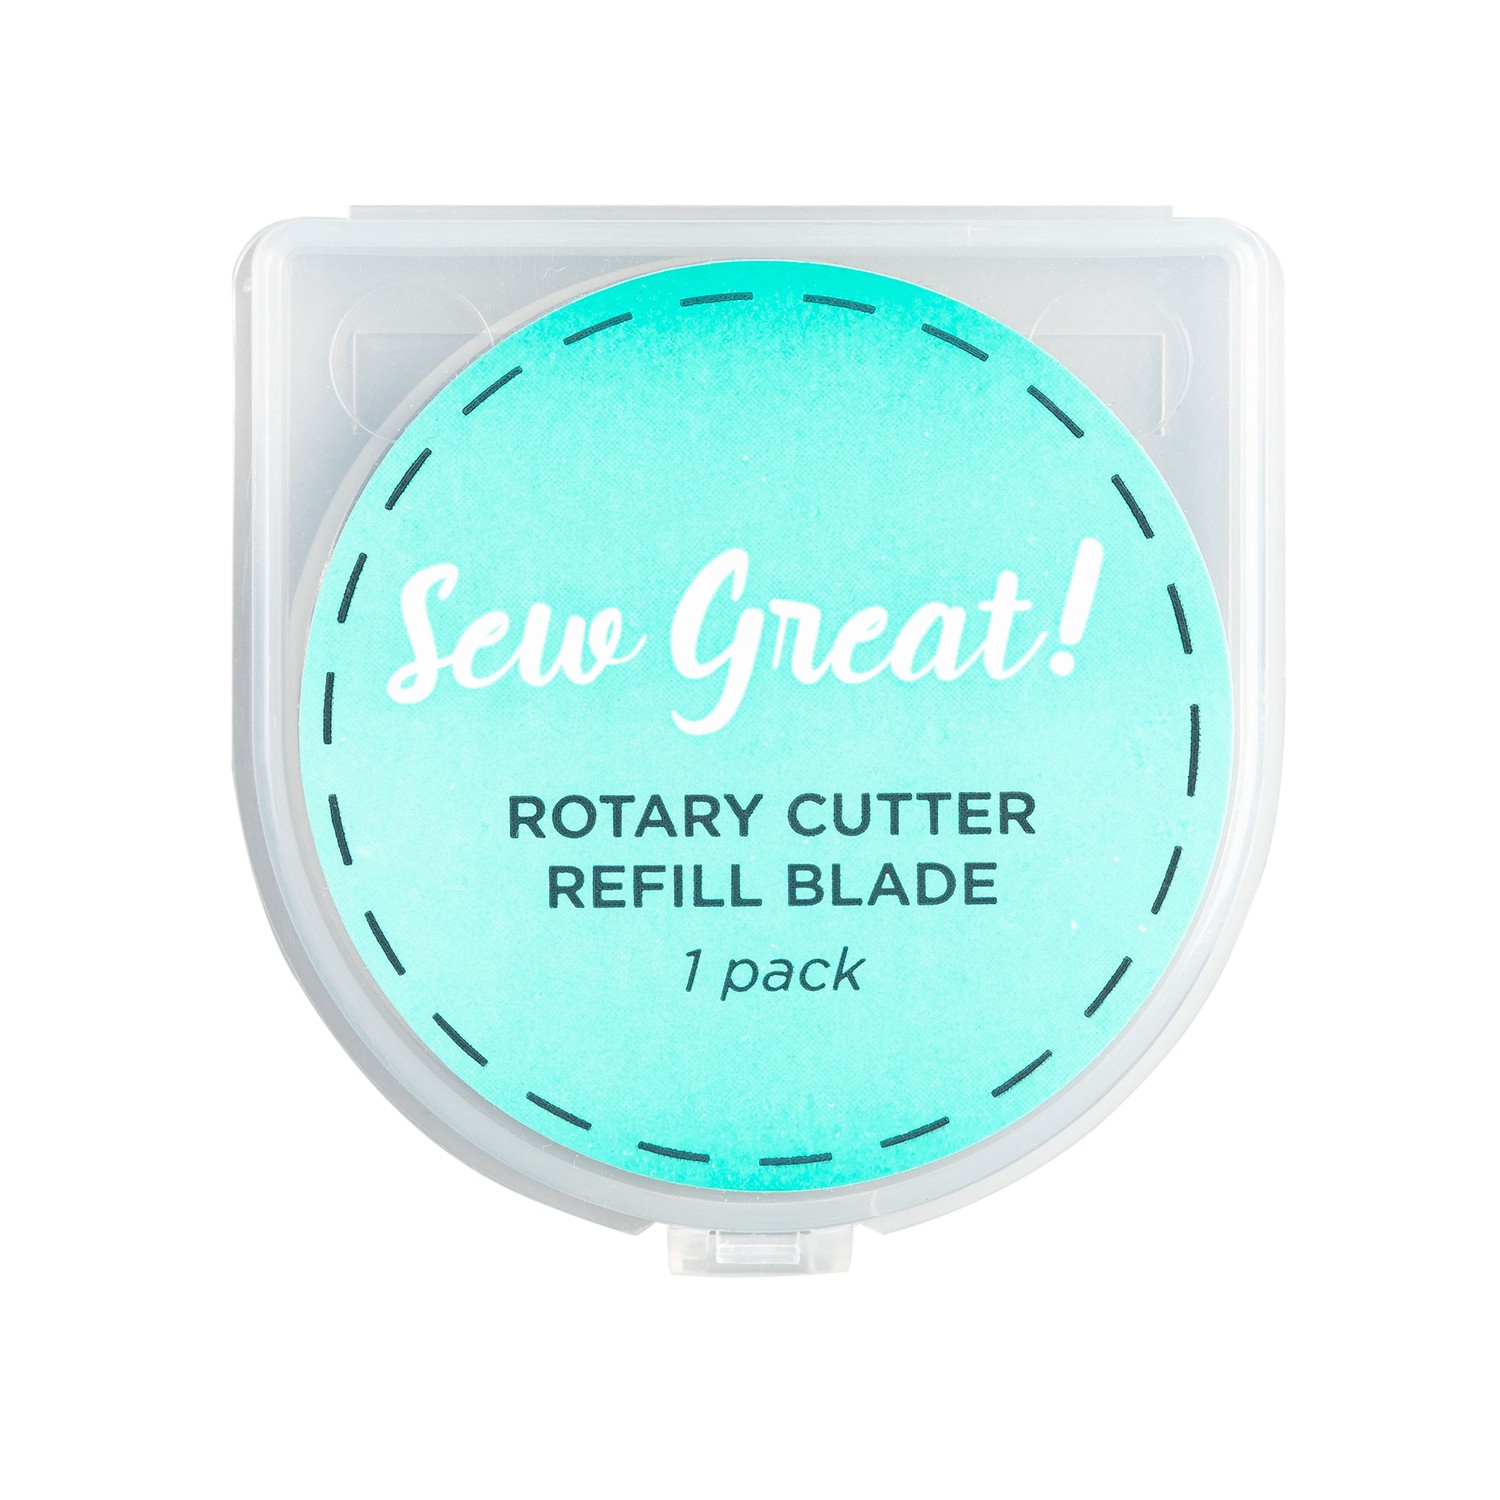 Sew Great! 45mm Rotary Cutter Refill Blade (1 Pack)